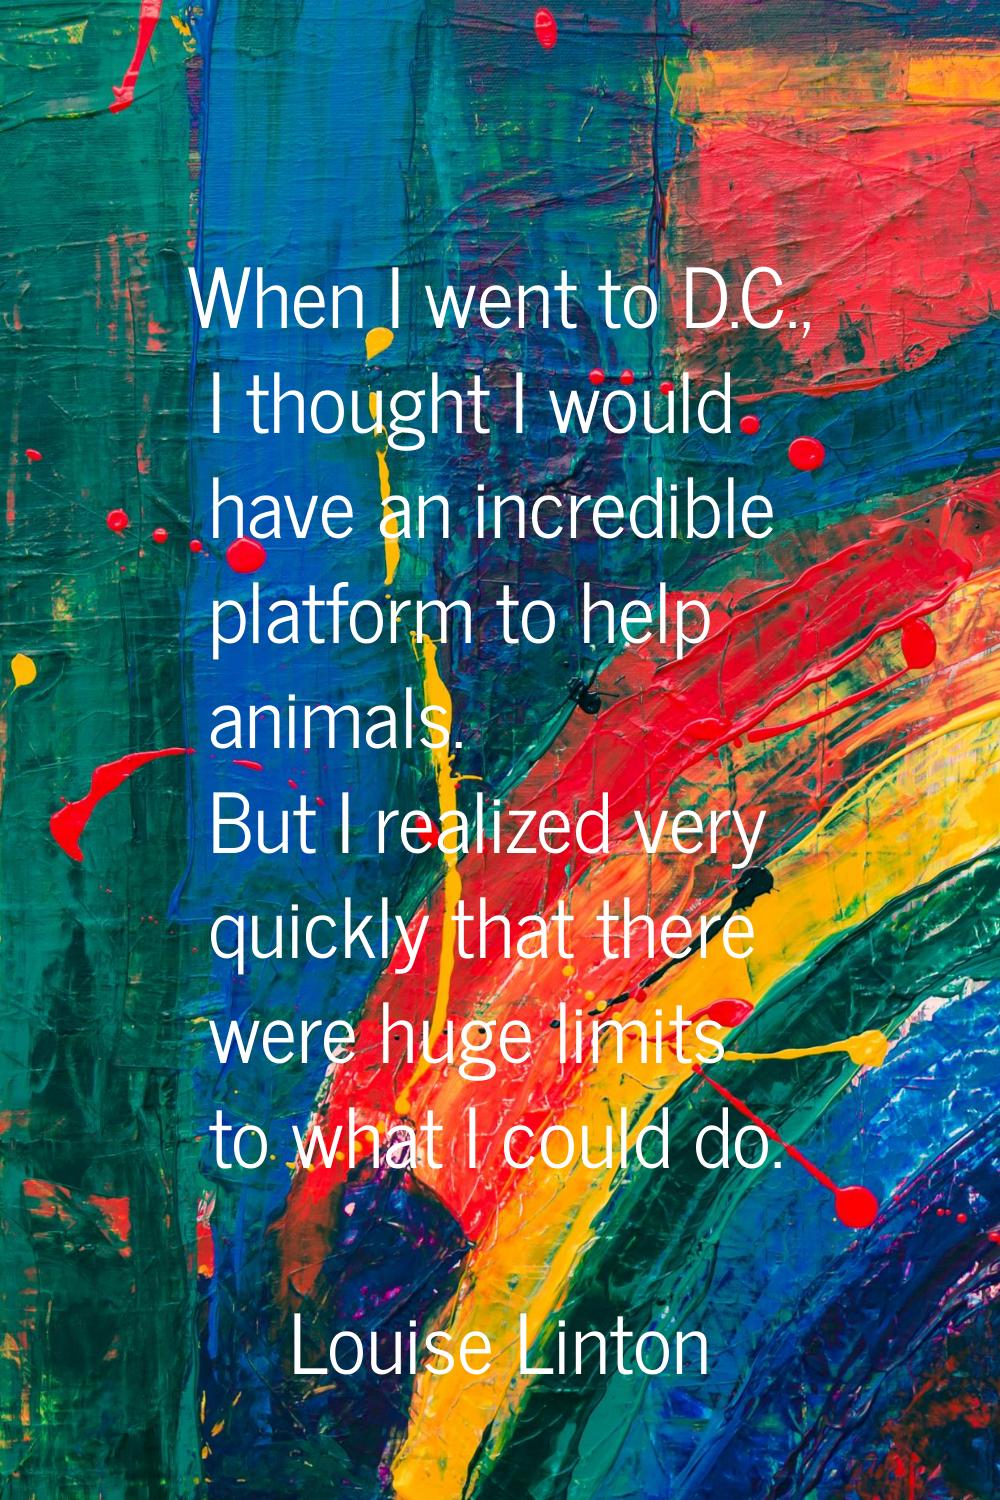 When I went to D.C., I thought I would have an incredible platform to help animals. But I realized 